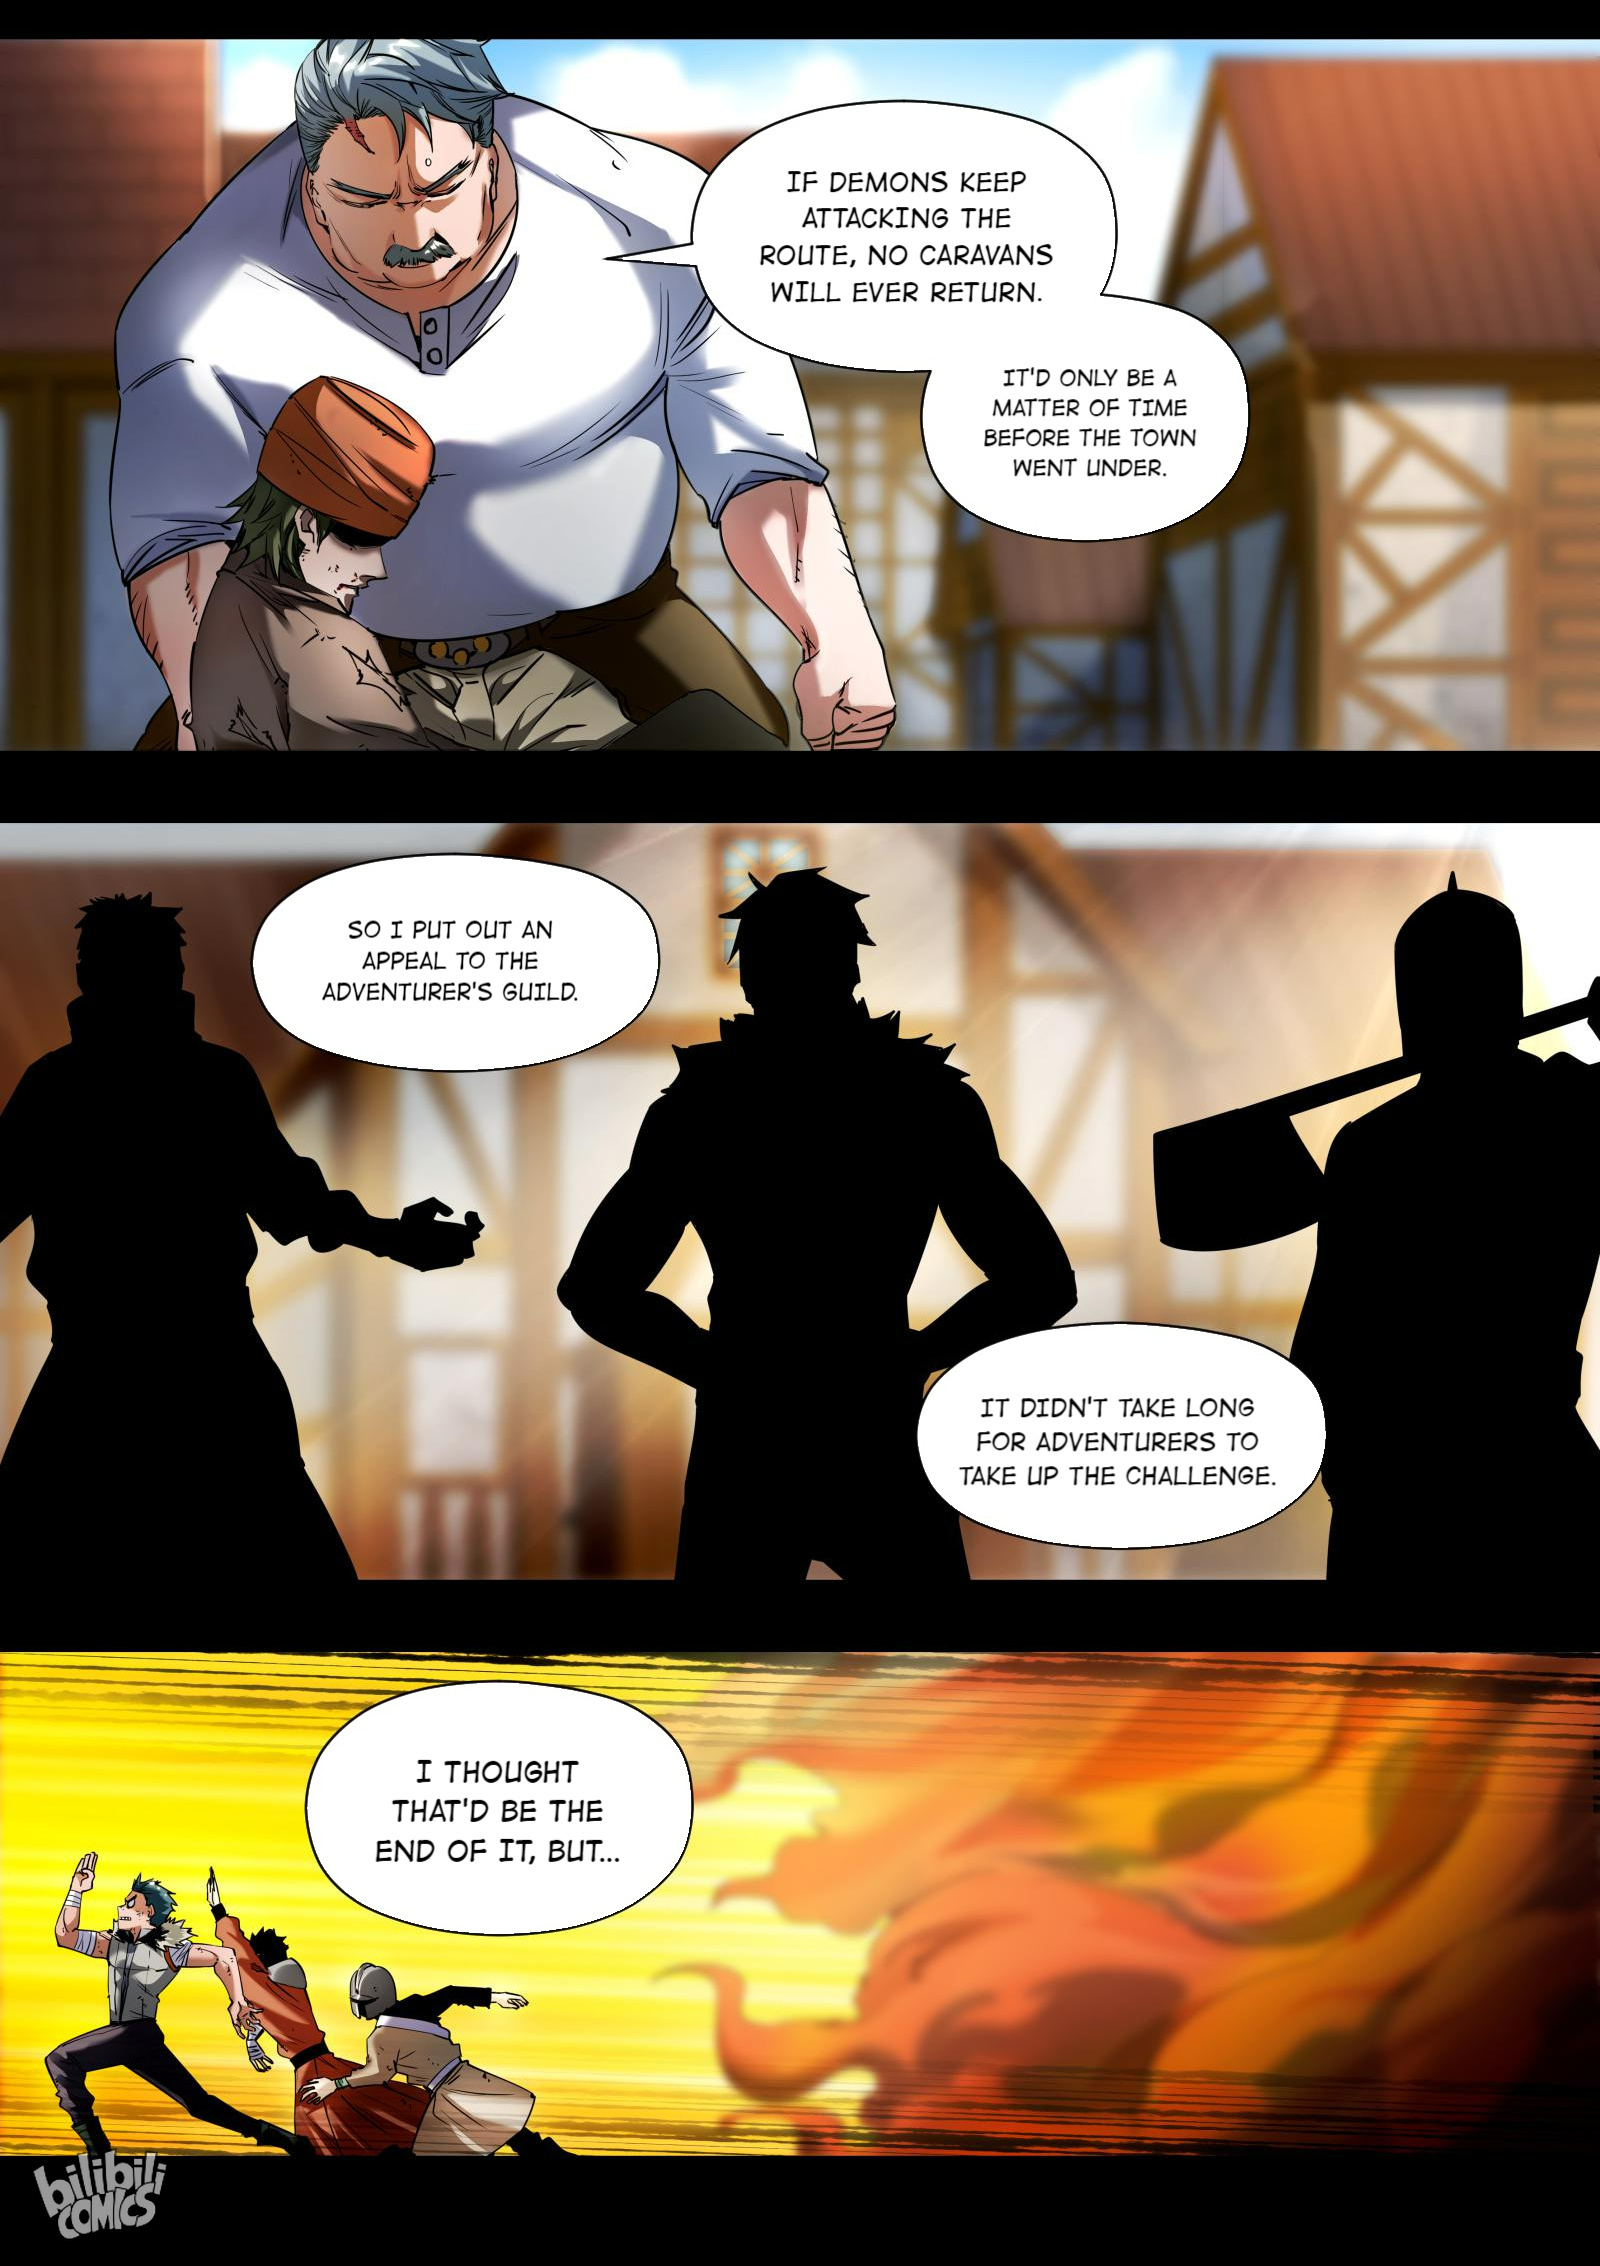 The Sichuan Cuisine Chef And His Valiant Babes Of Another World - Page 3